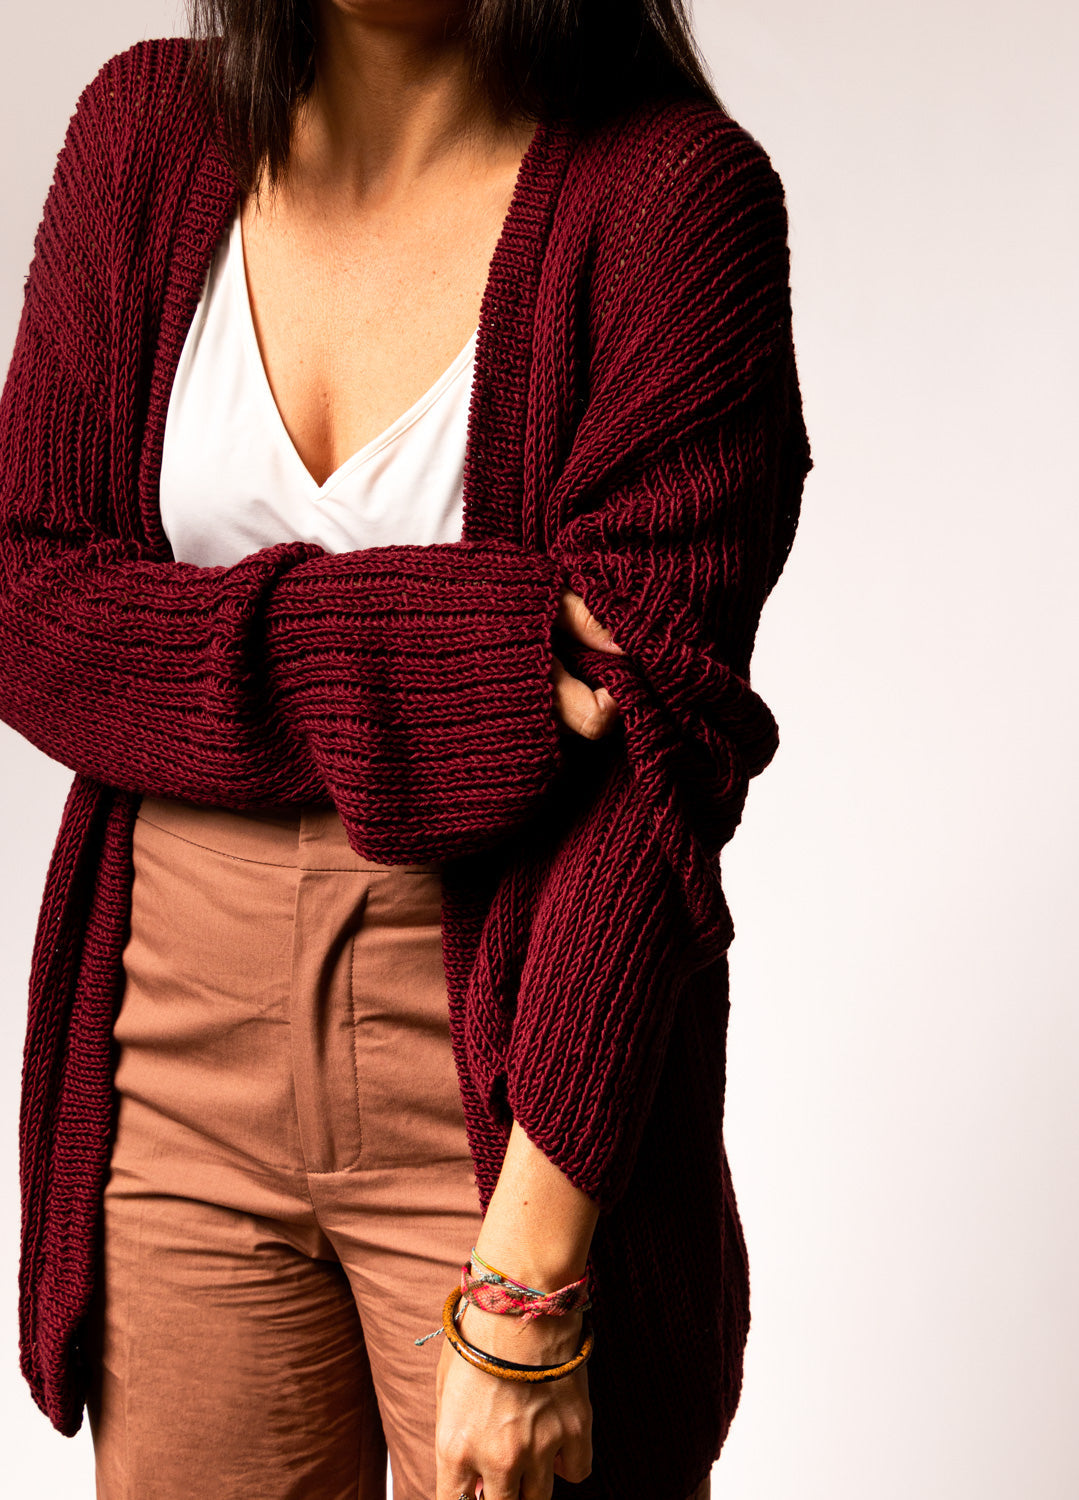 Pacific Red Cardigan Kit